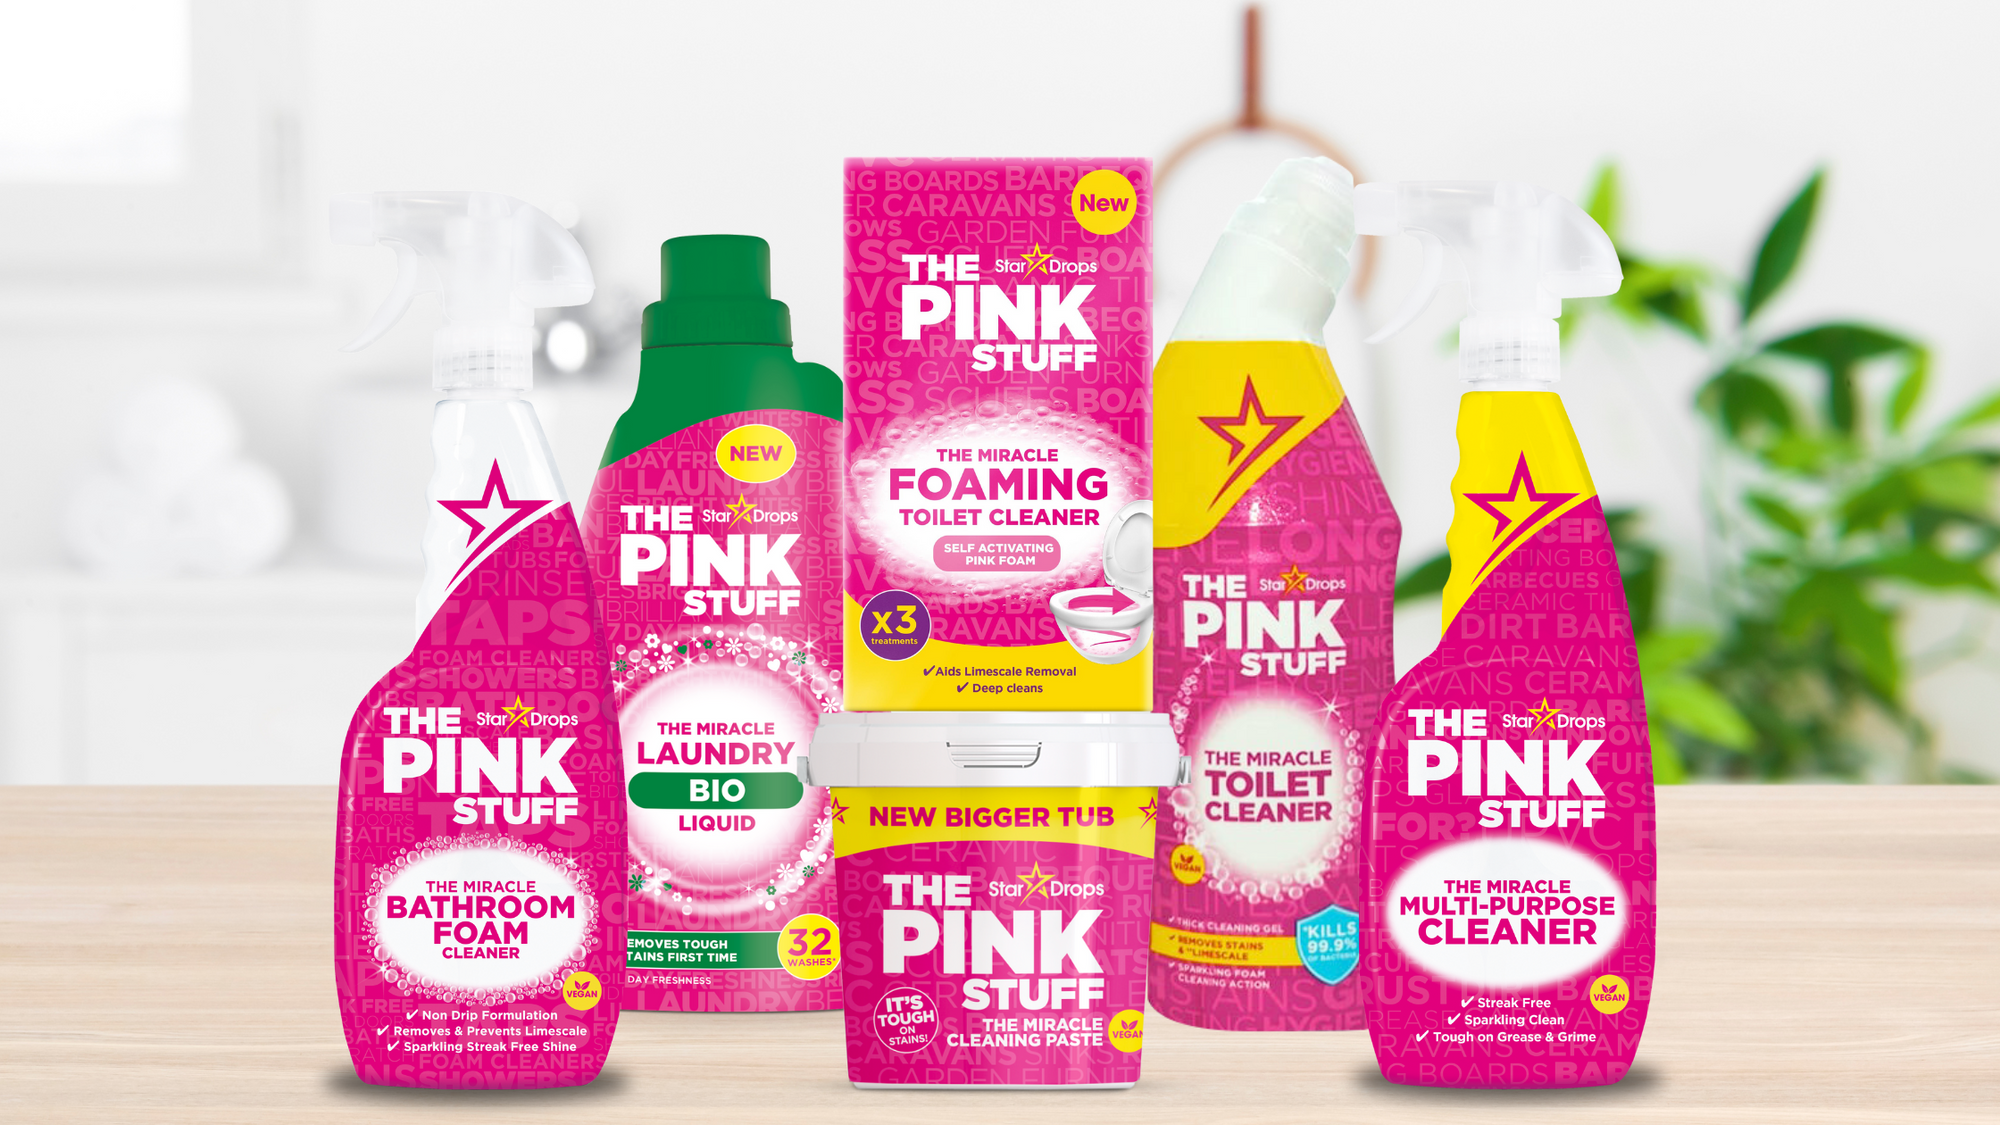 Clean Your Bathroom With The Power of Pink